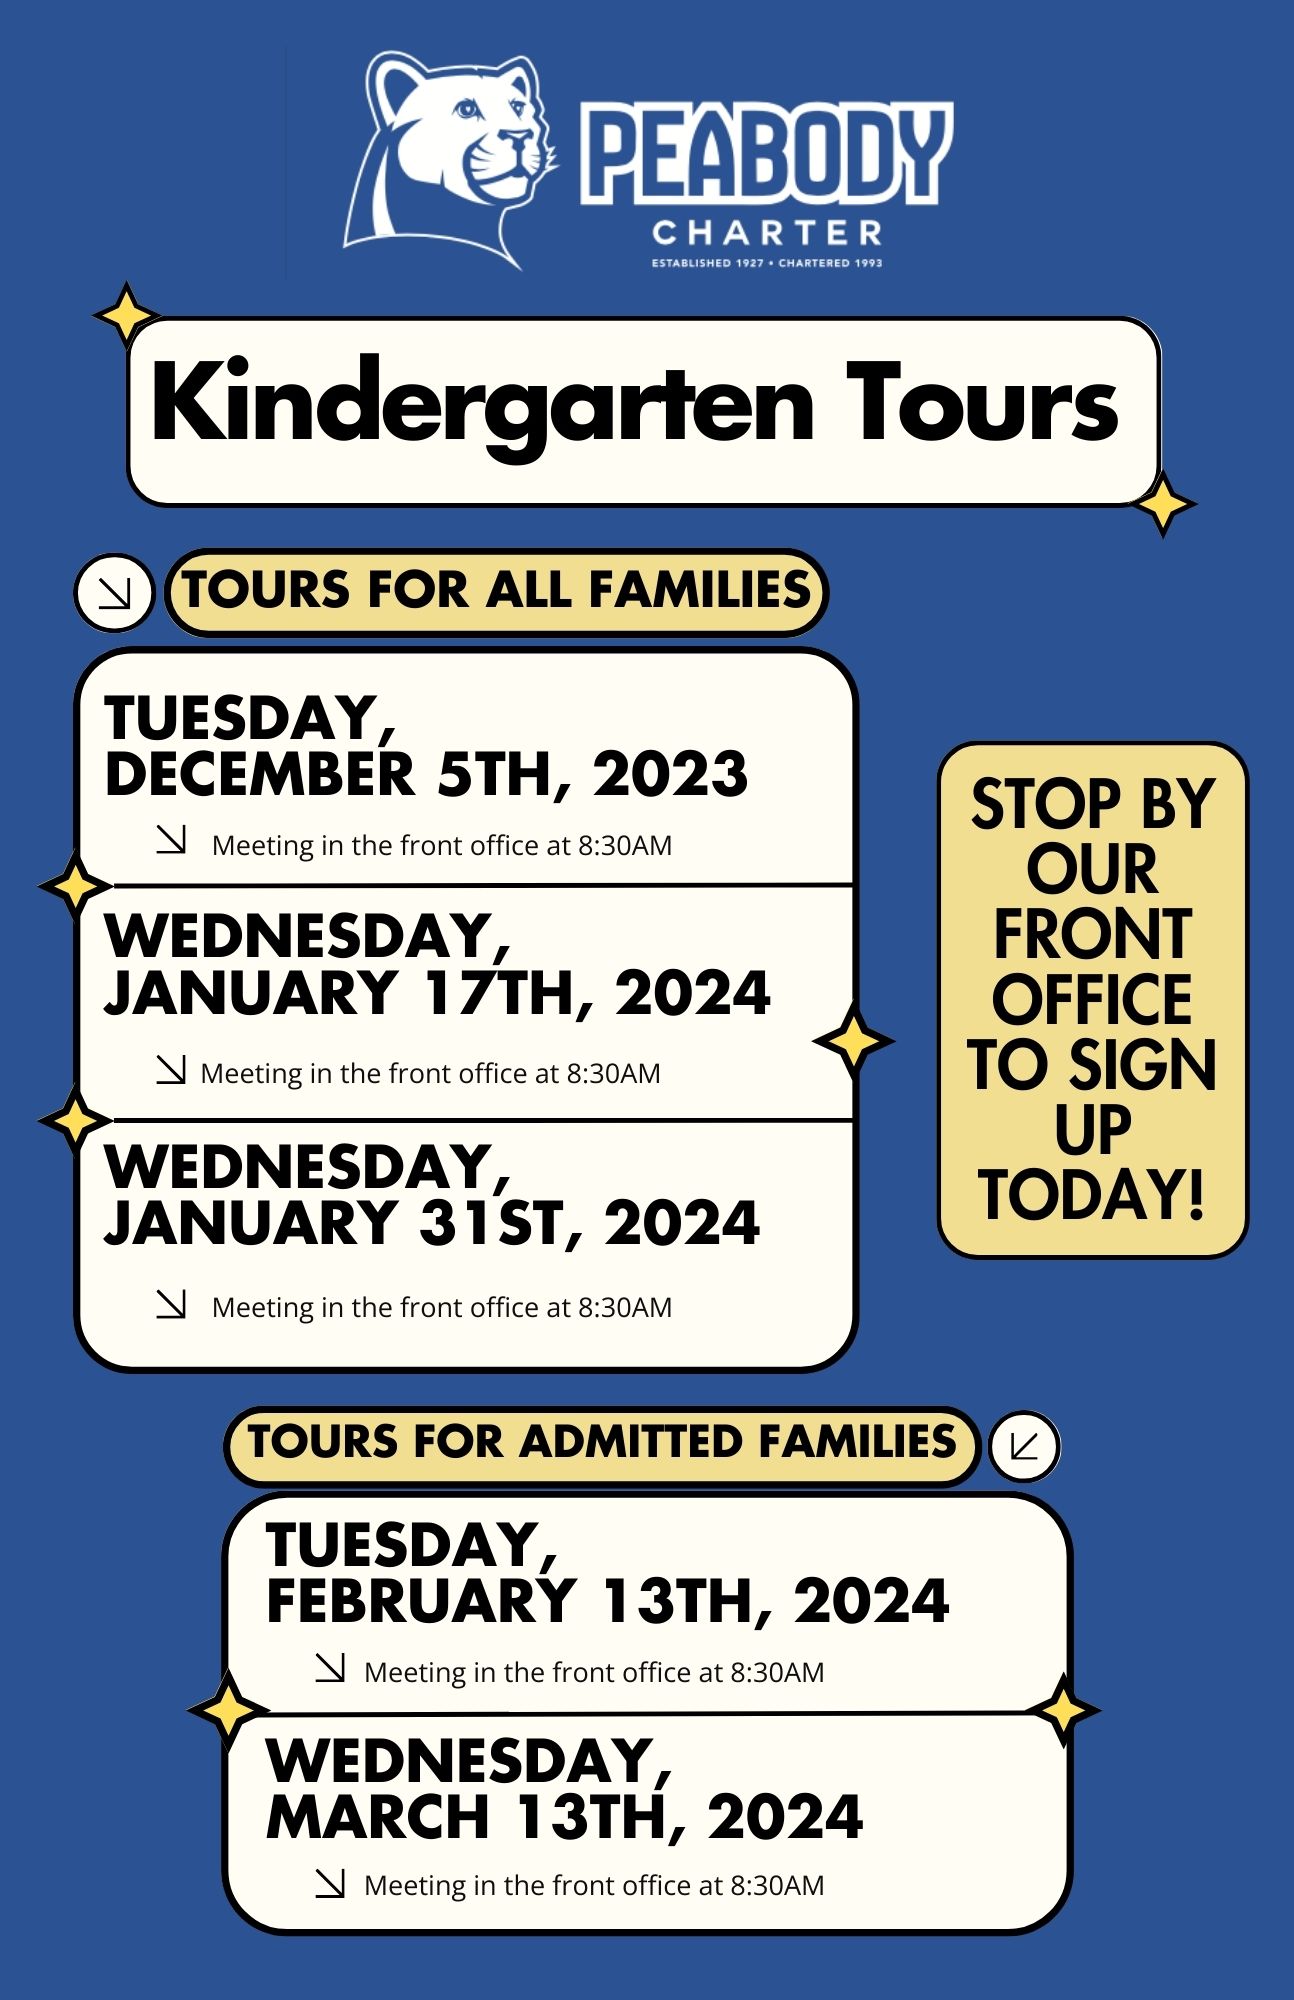 Kindergarten tours for all families, contact our office for details and to sign up